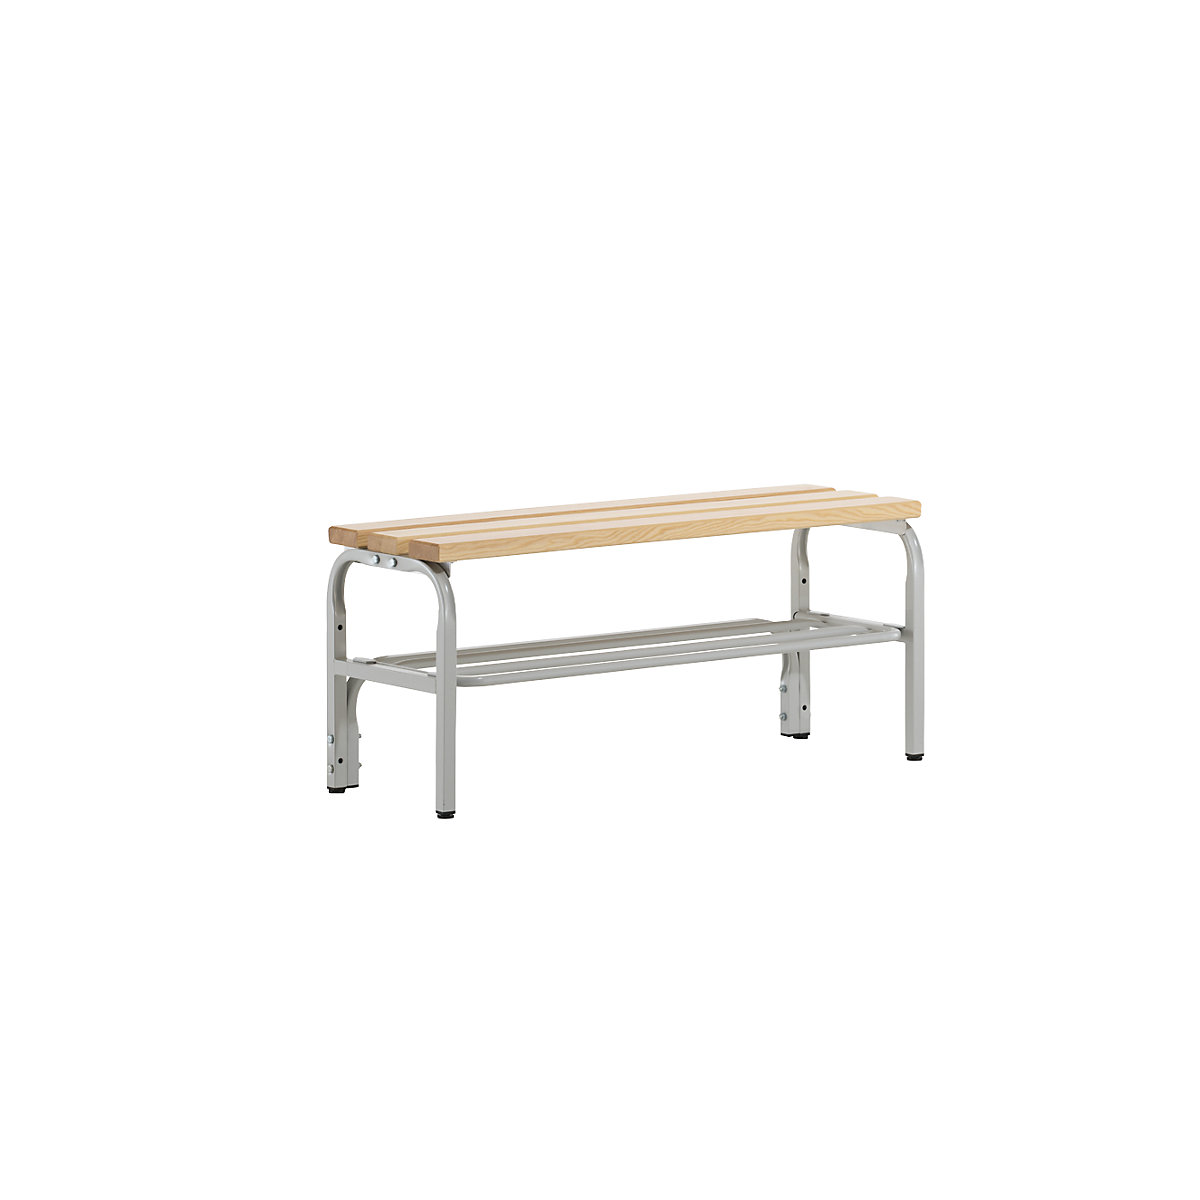 Cloakroom bench - Sypro